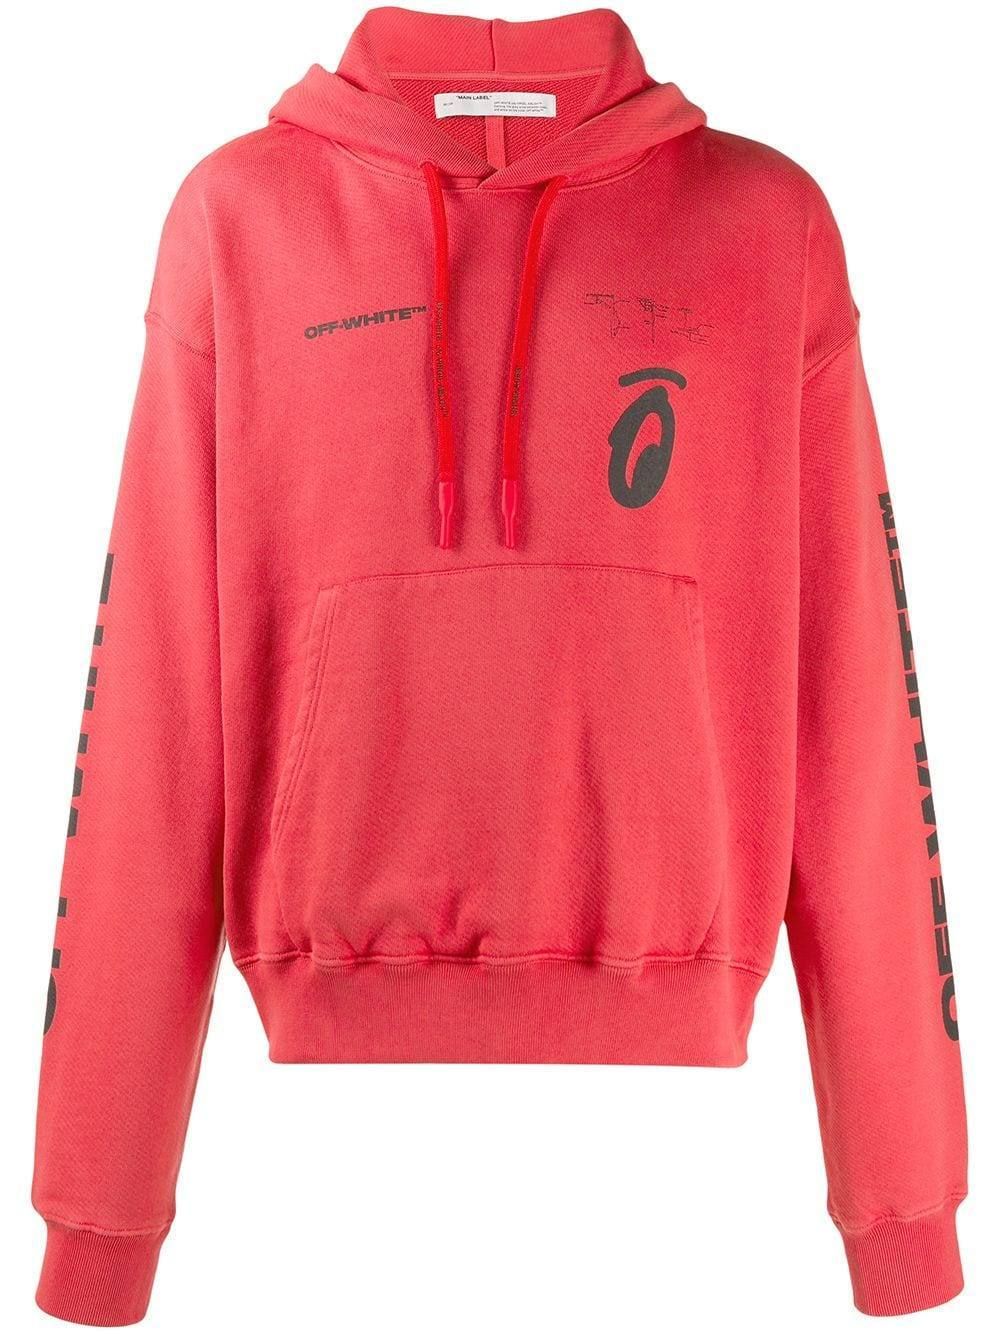 Red Hooded Cotton Sweatshirt with Graphic Print